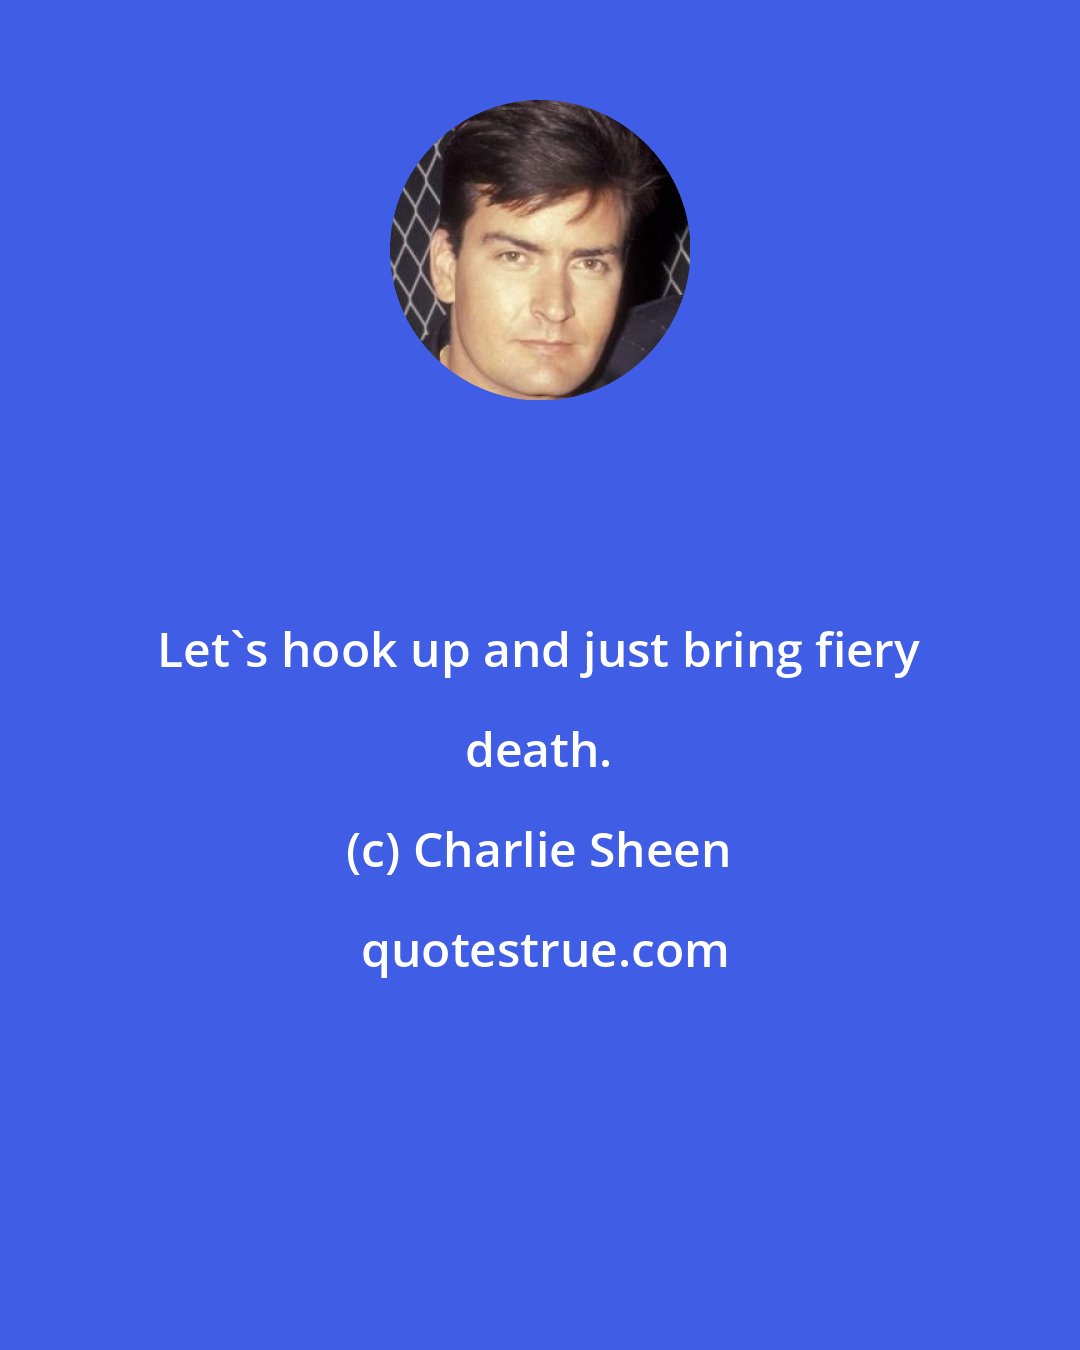 Charlie Sheen: Let's hook up and just bring fiery death.